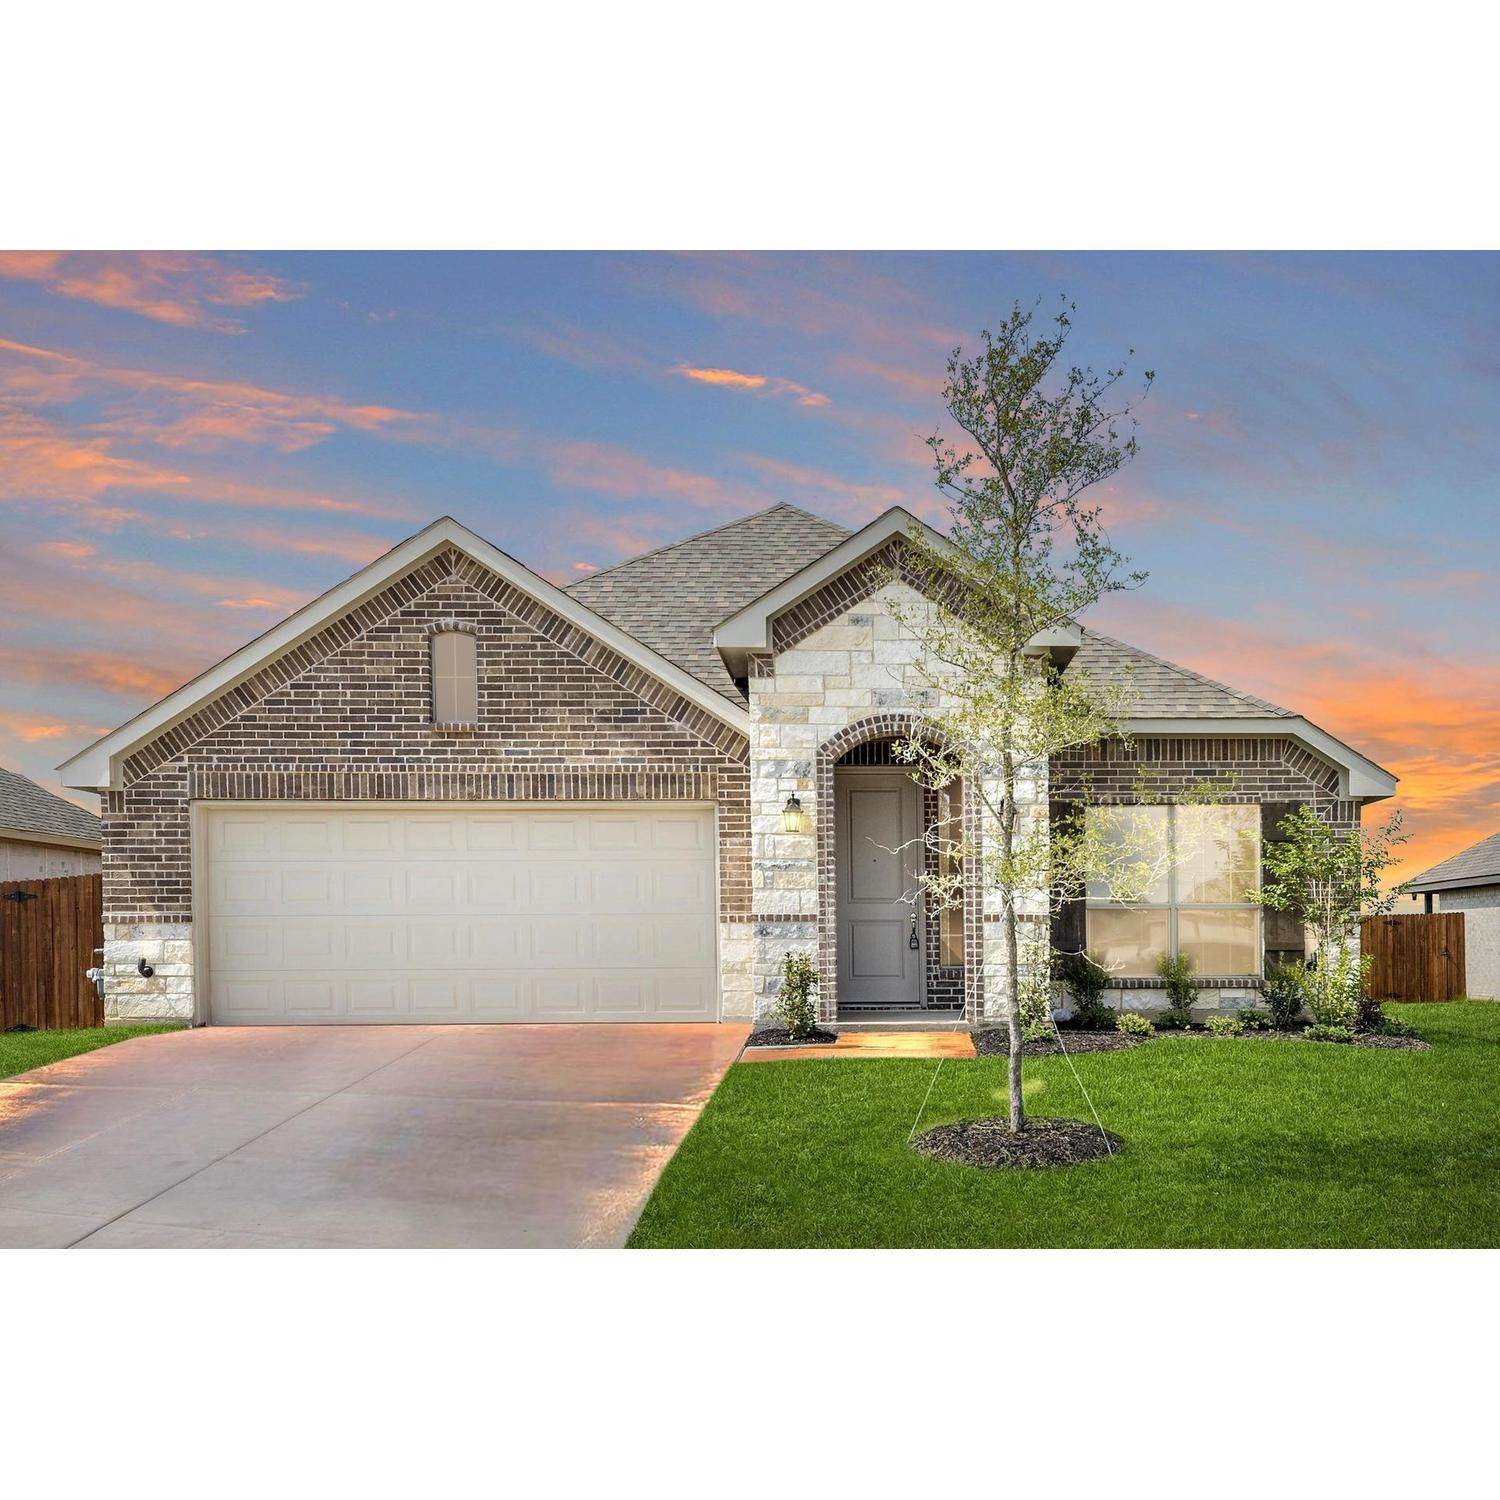 Single Family for Sale at Crowley, TX 76036